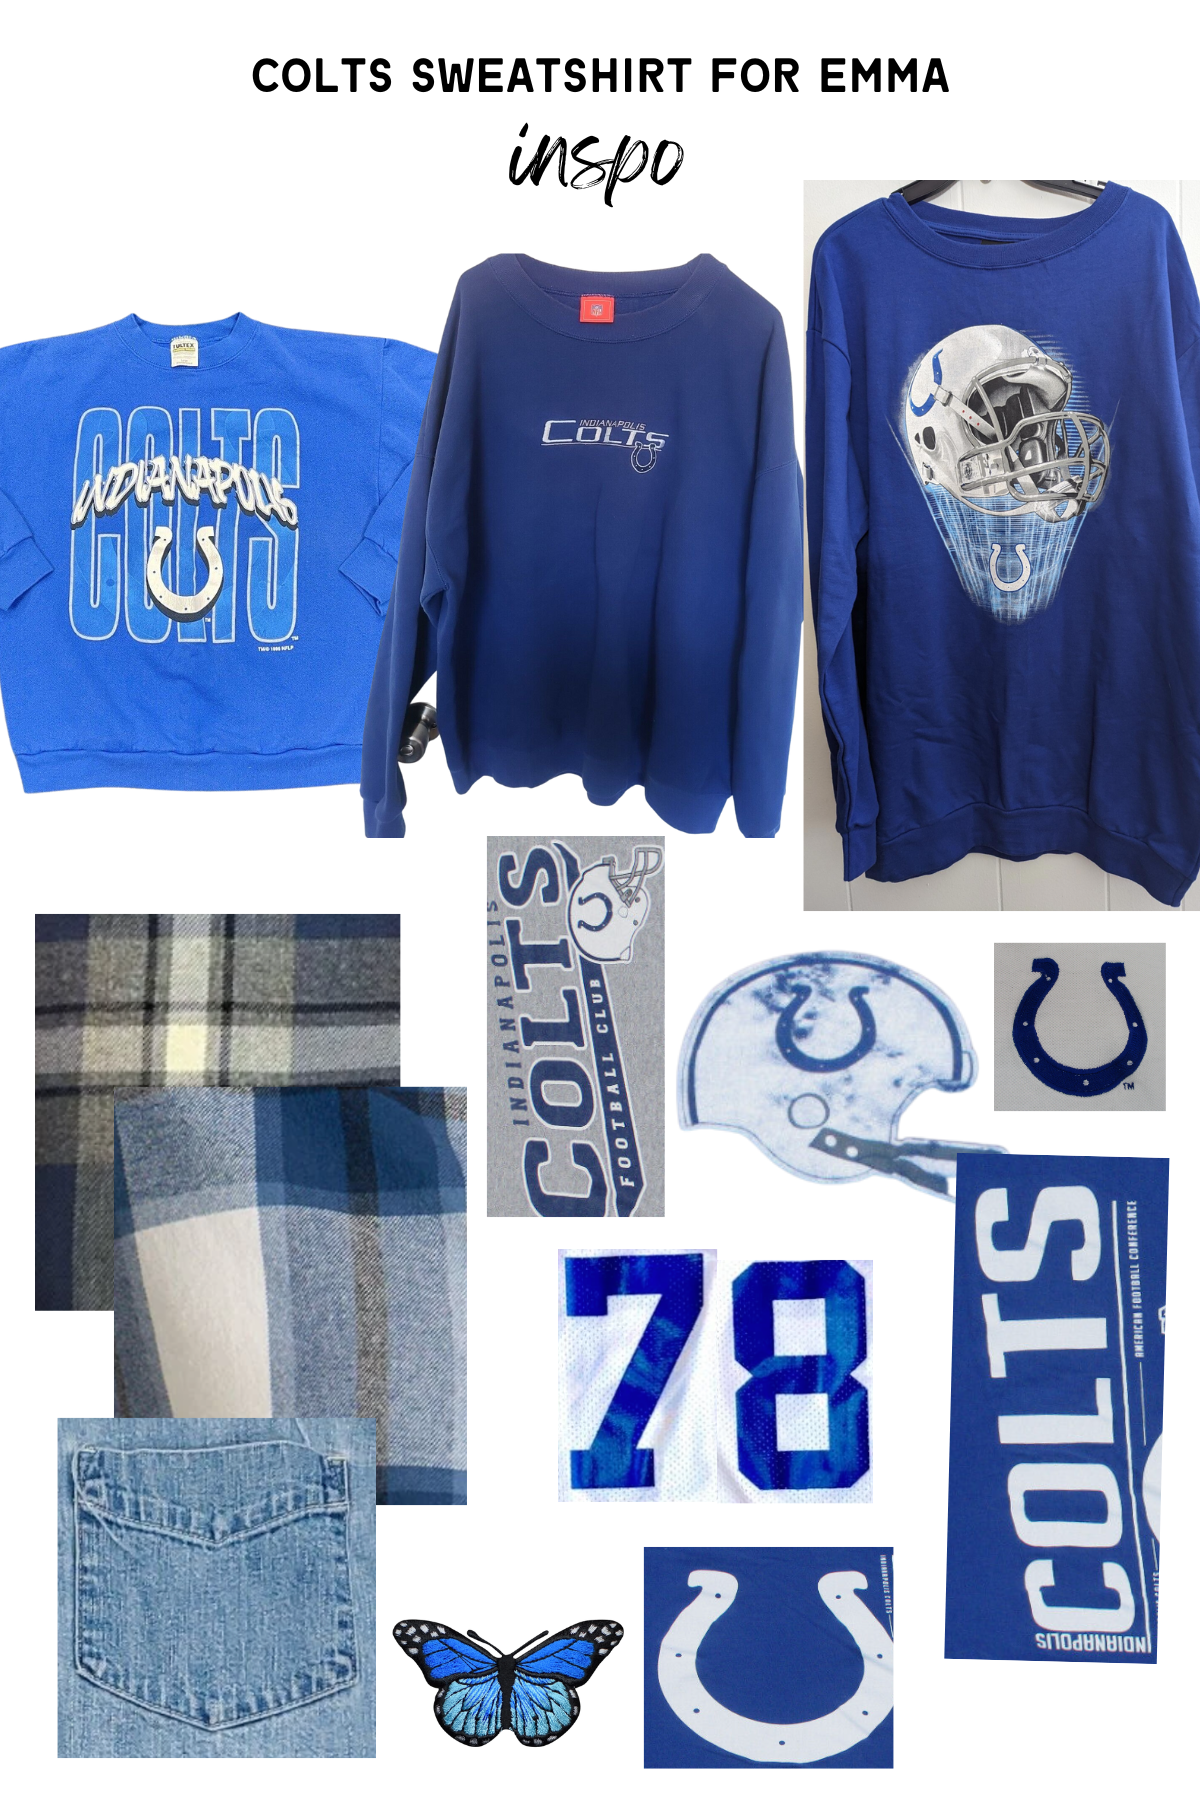 Upcycled Custom Order Colts Patchwork Sweatshirt for Emma